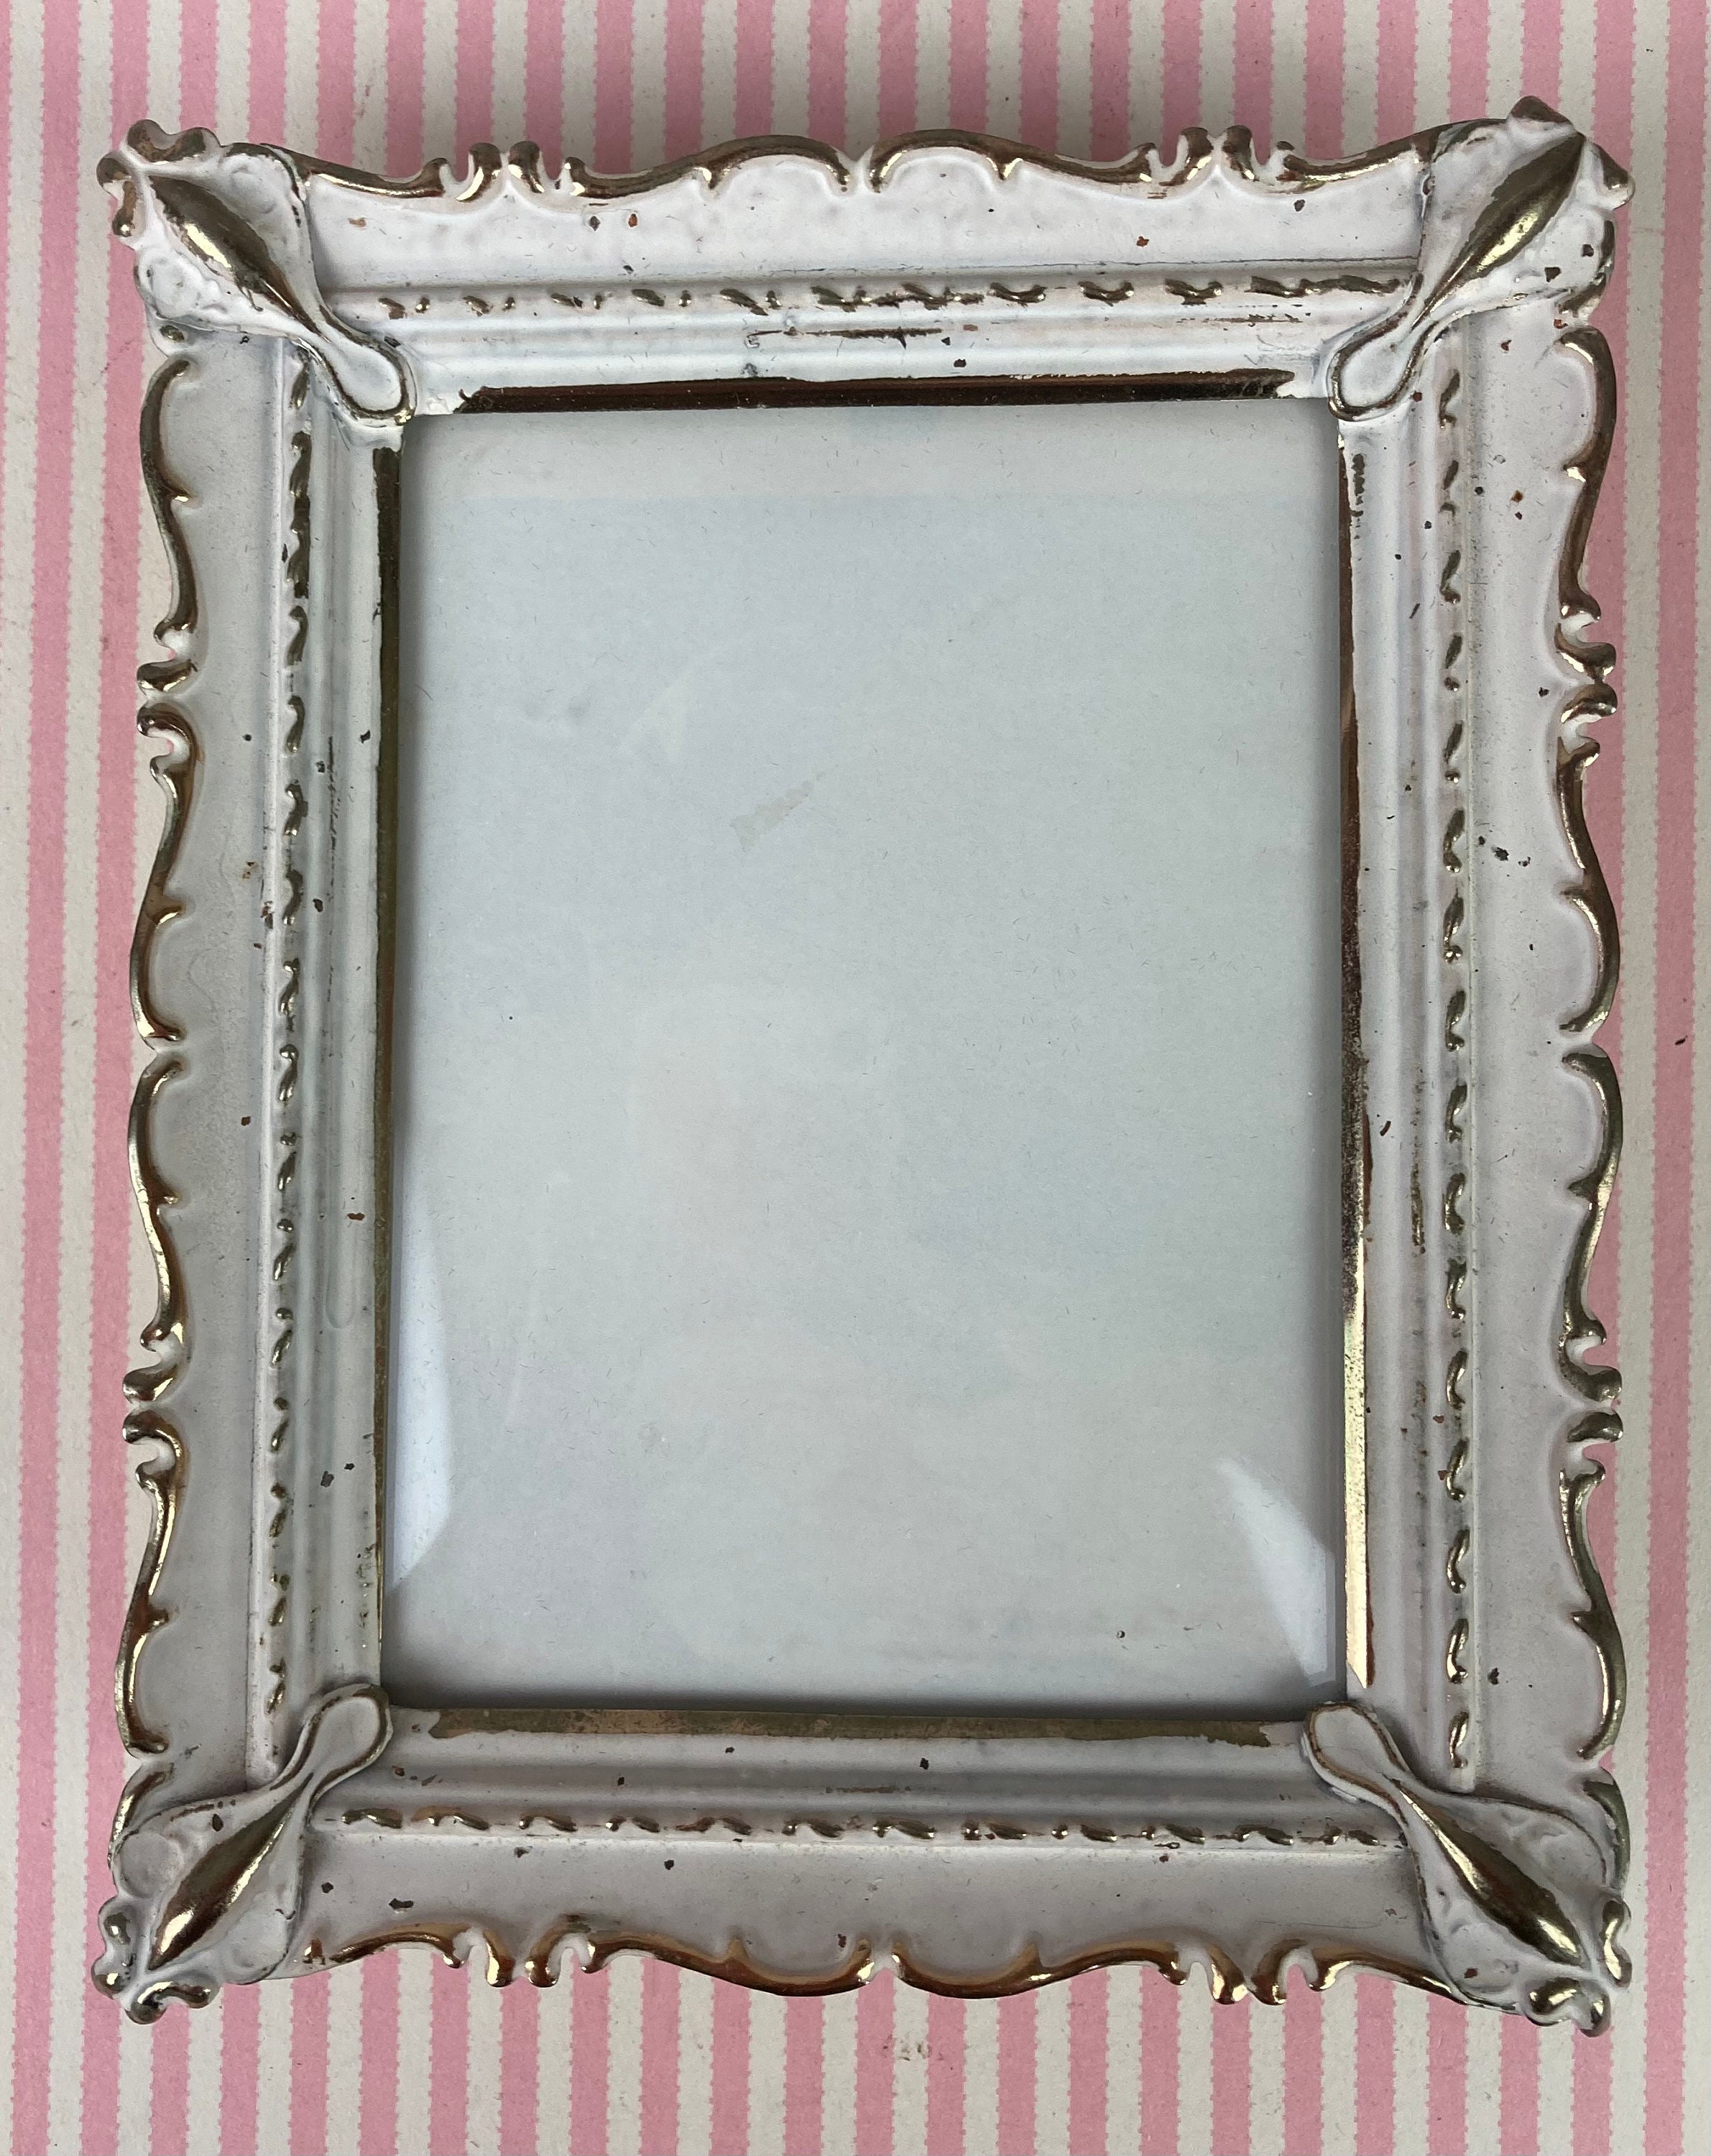 Buy 4x4 inches Photo Frame In Metallic Golden Finish Online. COD. Low  Prices. Free Shipping. Premium Quality.